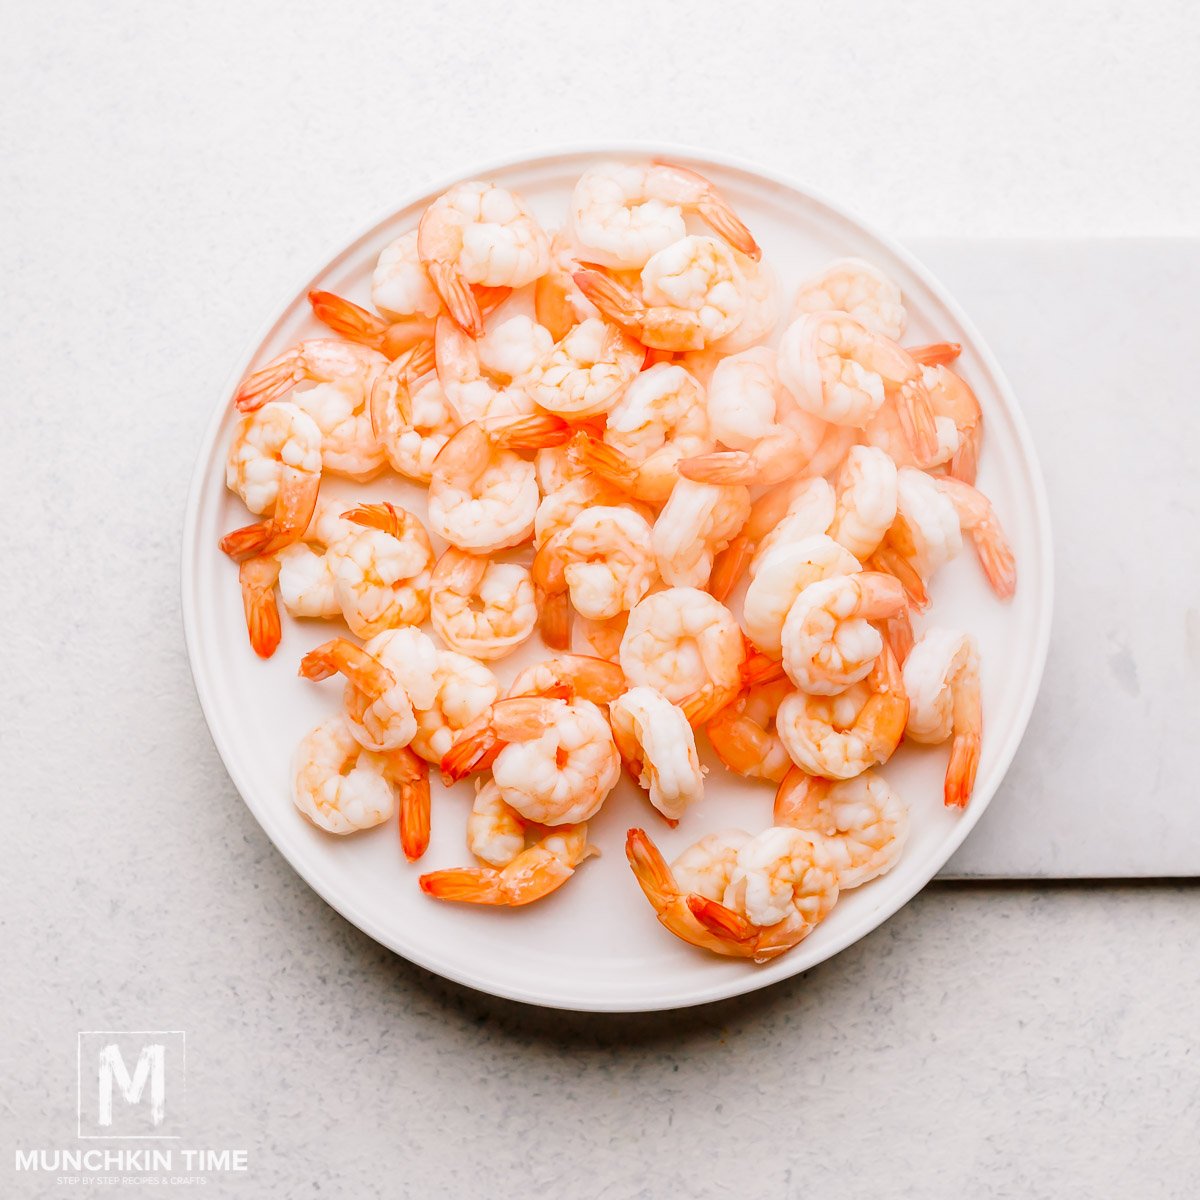 How to cook shrimp, cook shrimp in a boiling water for 1-2 minutes. 